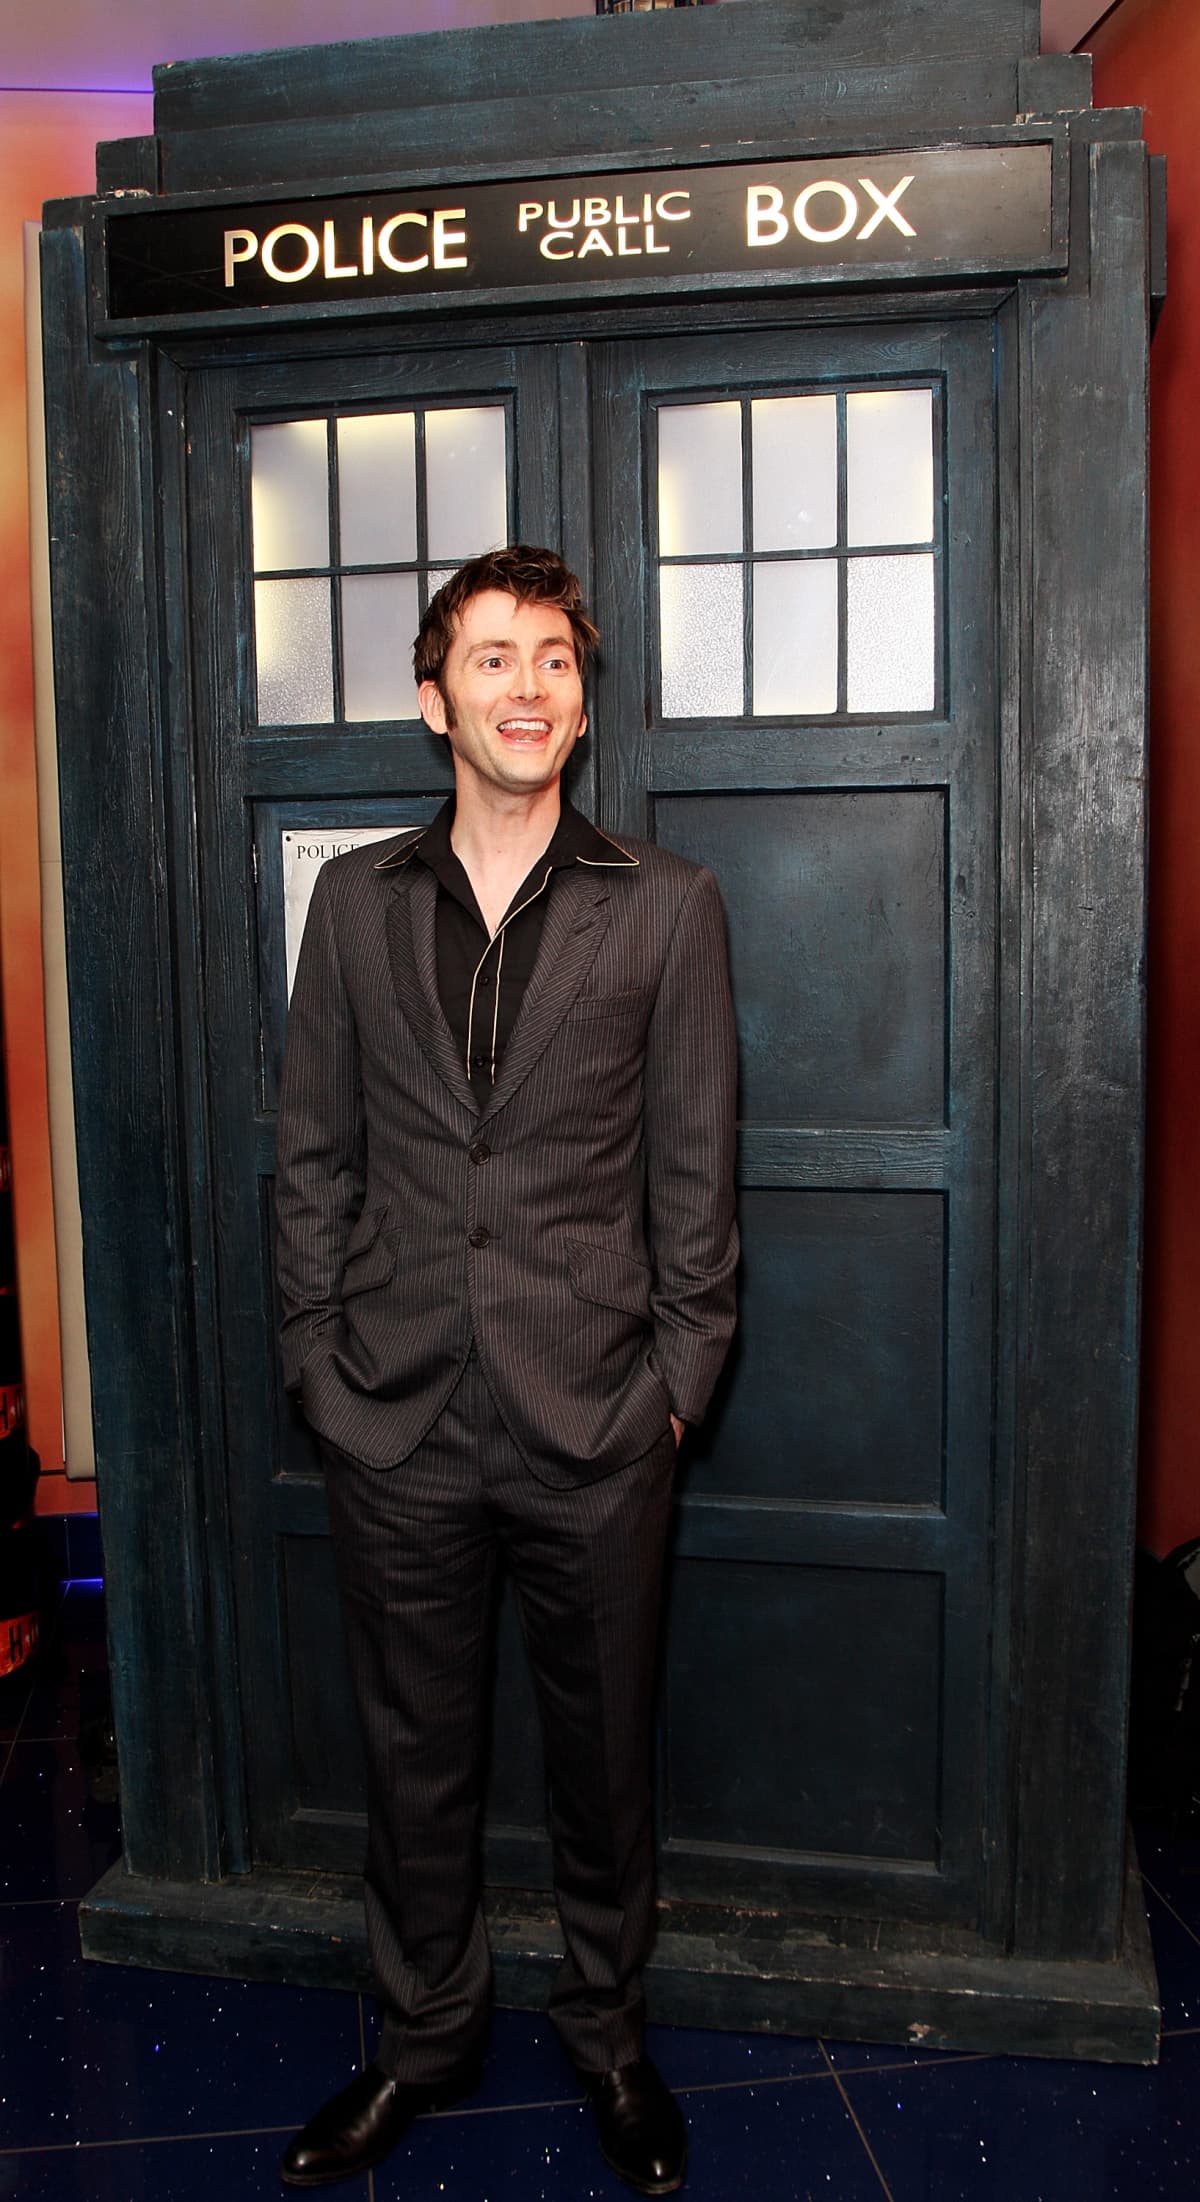 LONDON - APRIL 01: Actor David Tennant arrives at the press launch of 'Dr Who' series 4 at the Apollo West End on April 1, 2008 in London, England. The first episode of the new series is due to air on BBC 1 on April 5 at 18.20 GMT. (Photo by Dave Hogan/Getty Images)